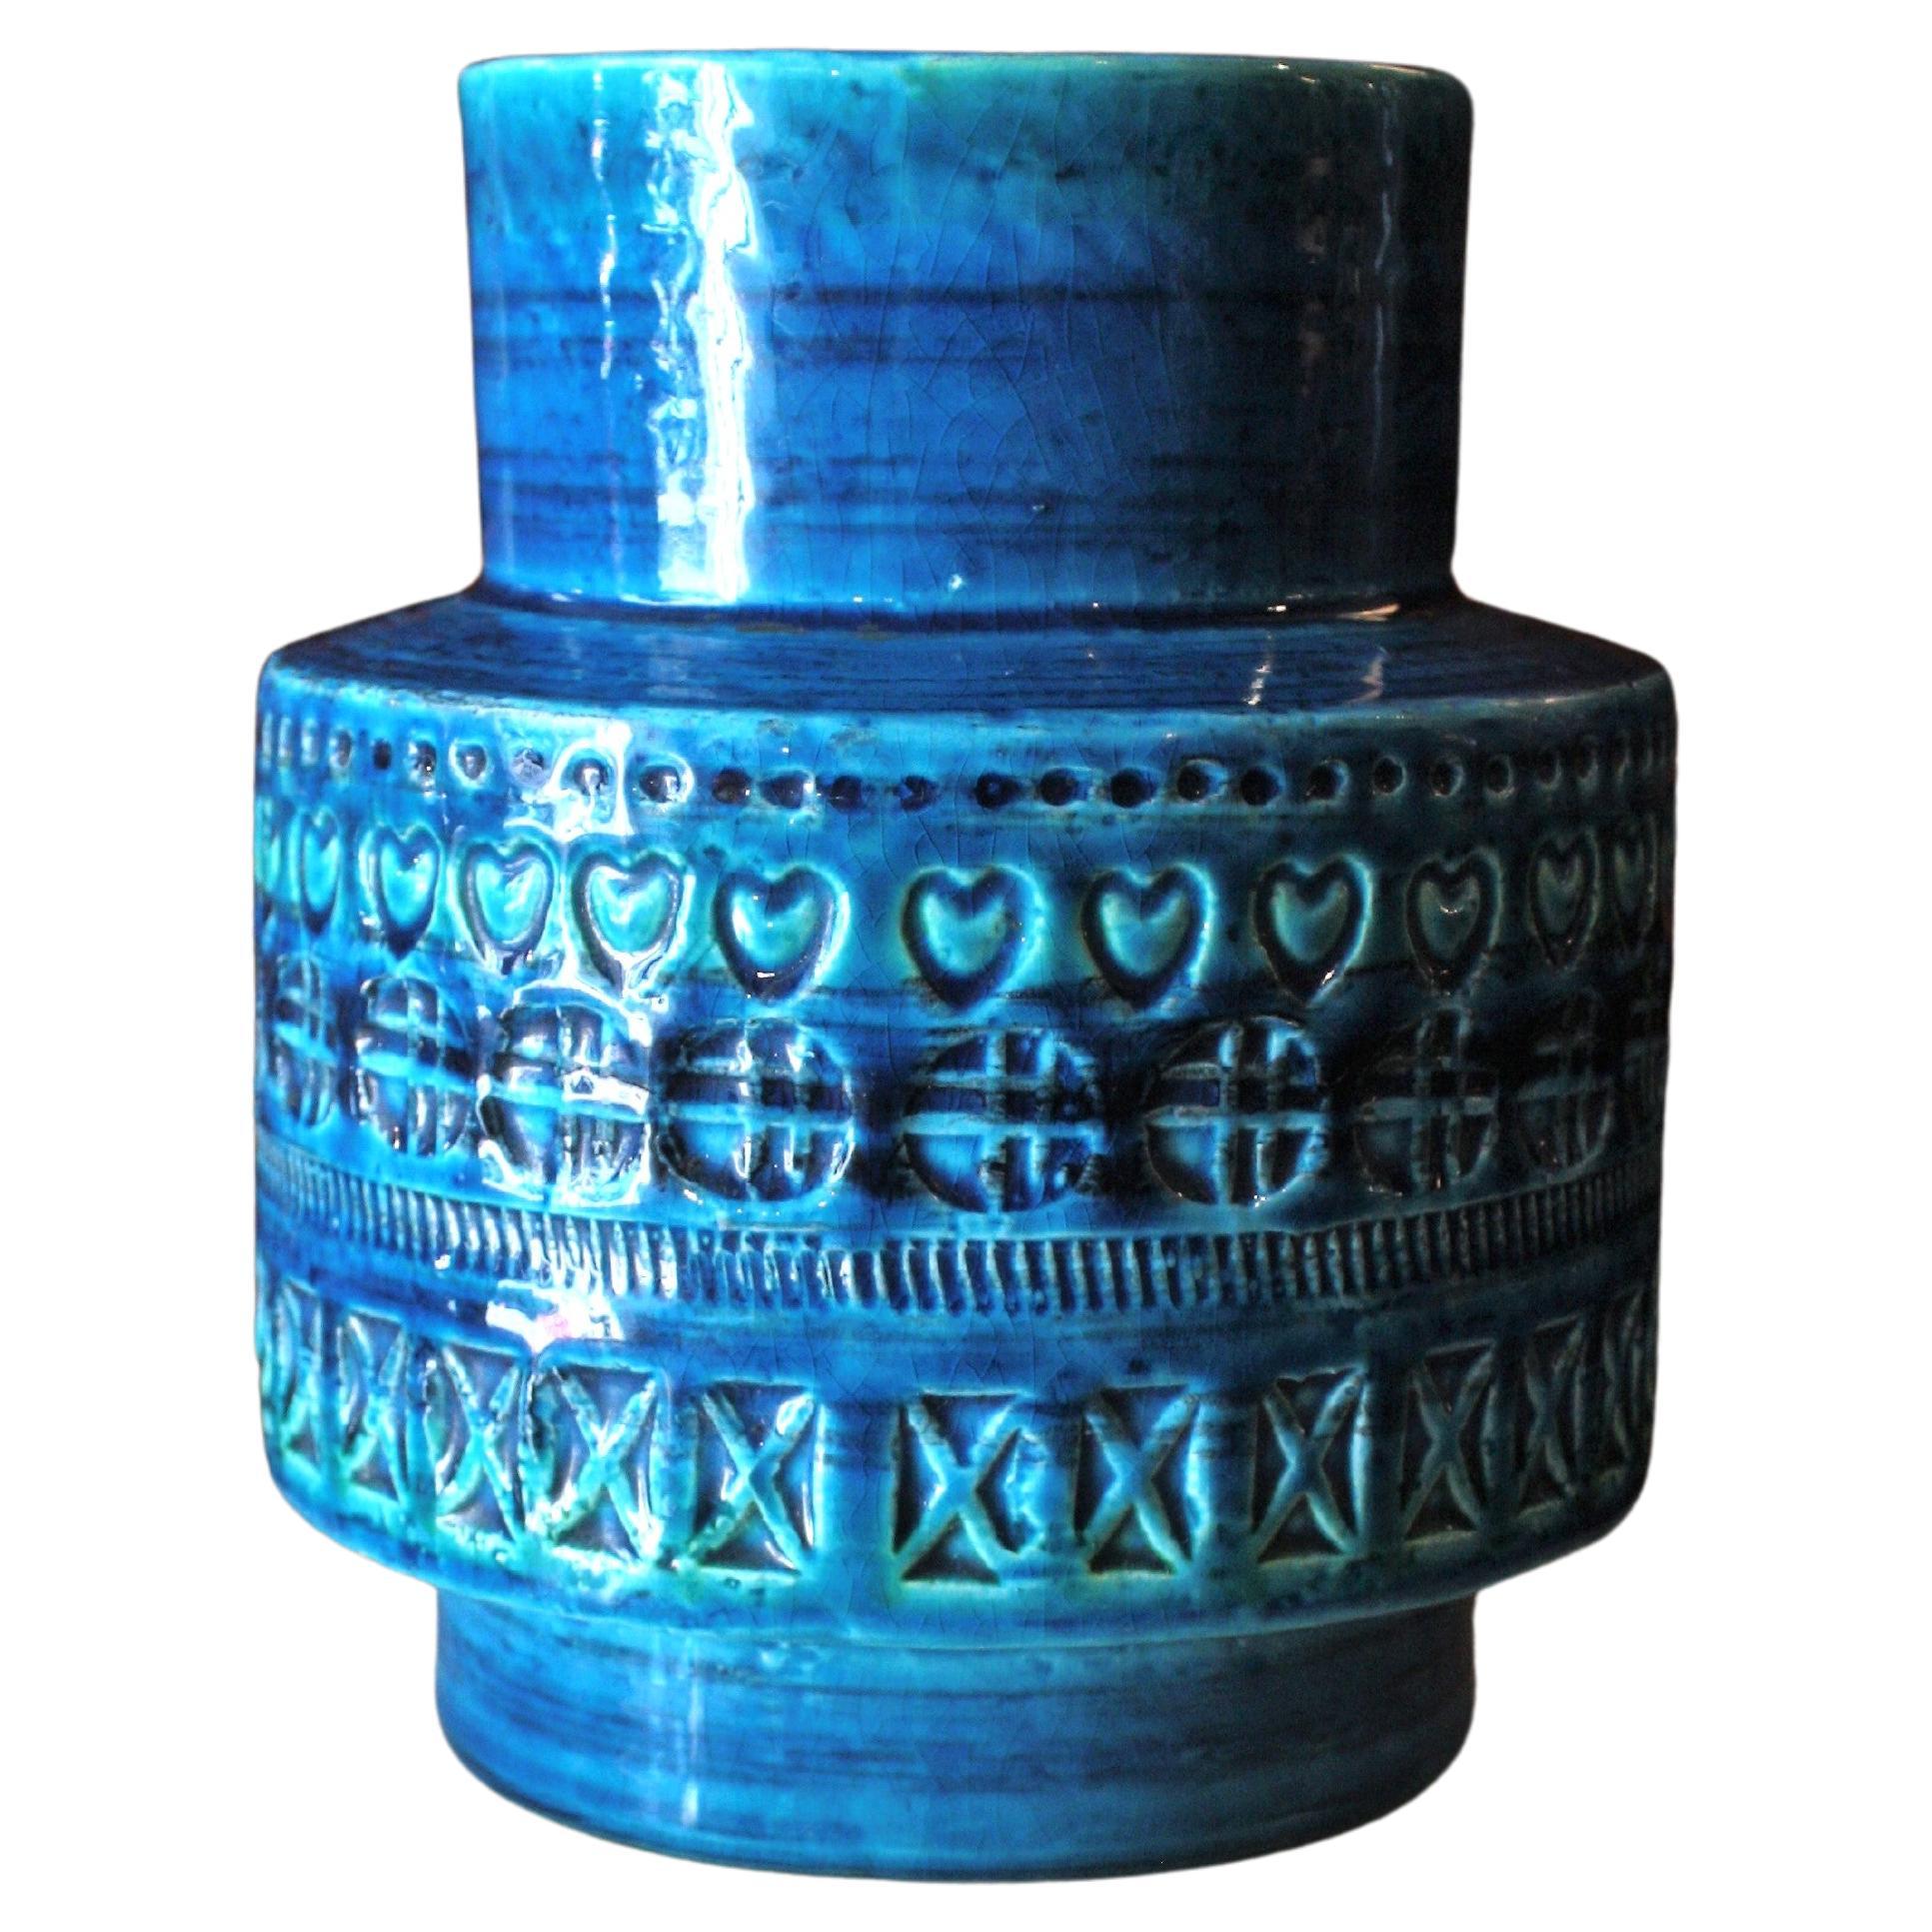 'Rimini blu' glazed ceramic vase designed by Aldo Londi for by Bitossi. Italy, 1960s.
This eye-catching vase is made of blue glazed ceramic with engraved patterns surrounding the central part. Its gorgeous shades of blue and the geometric design of